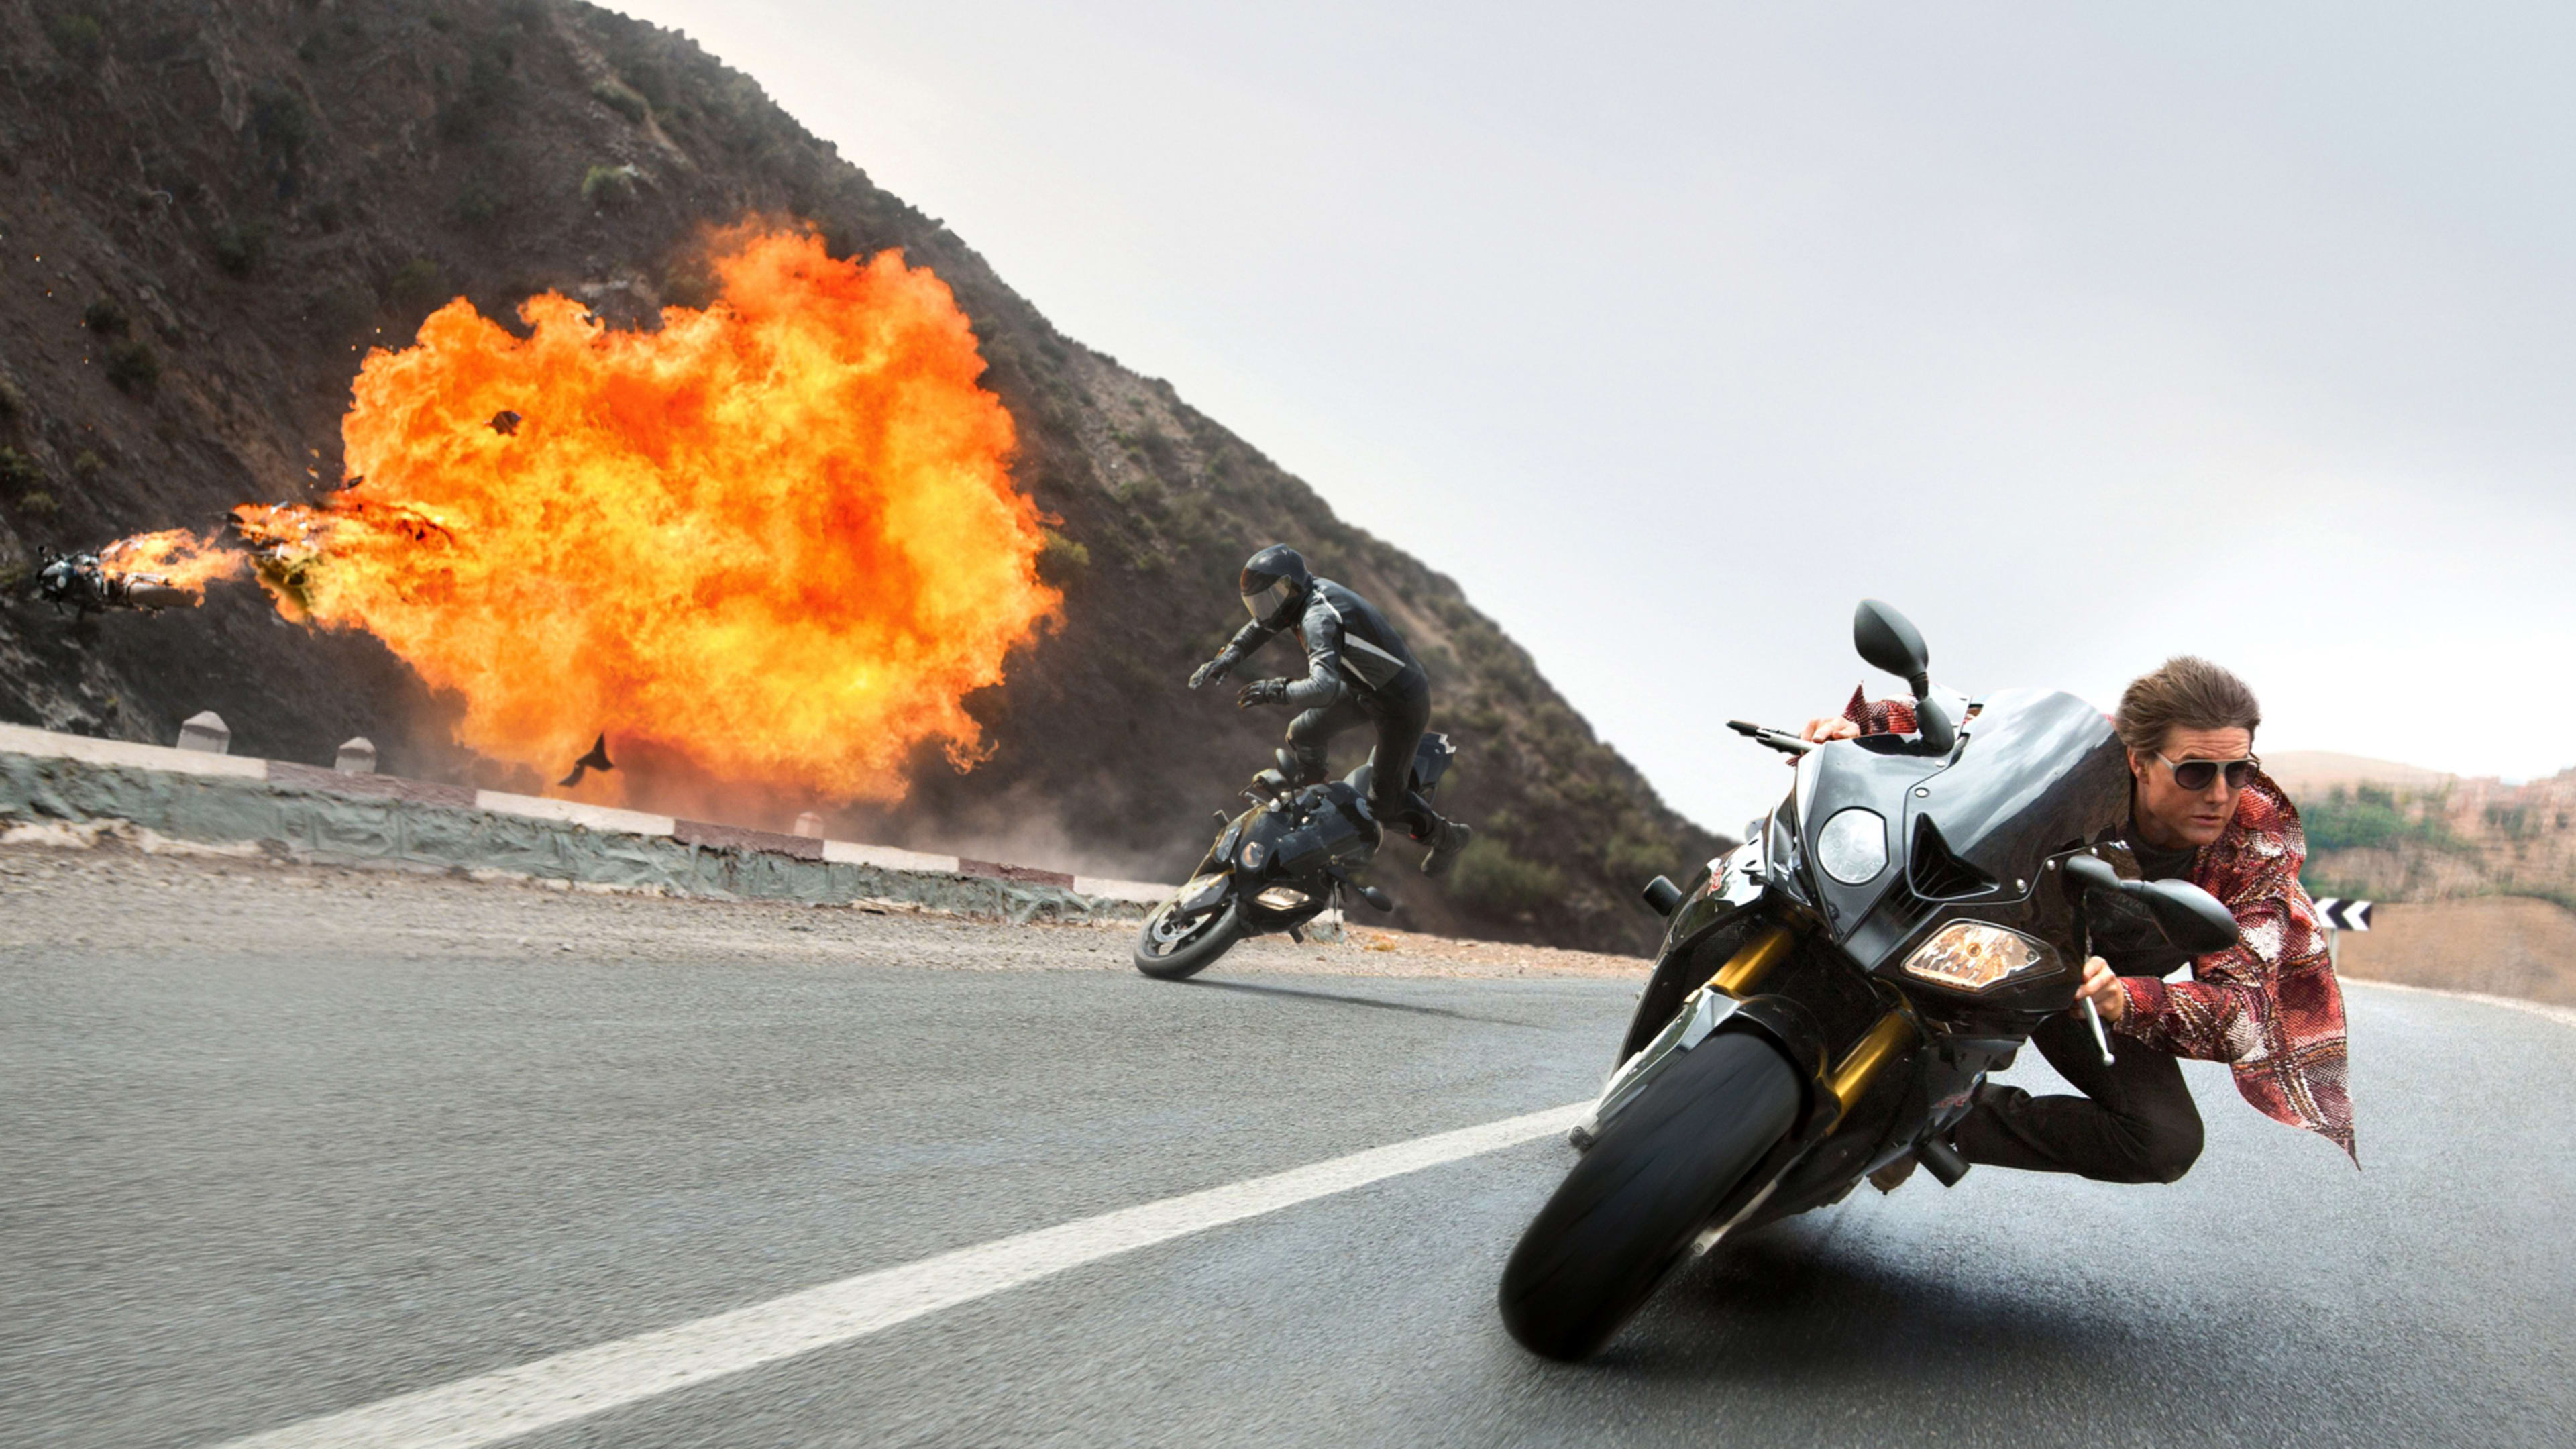 Which “Mission: Impossible” has the awesomest gadgets?